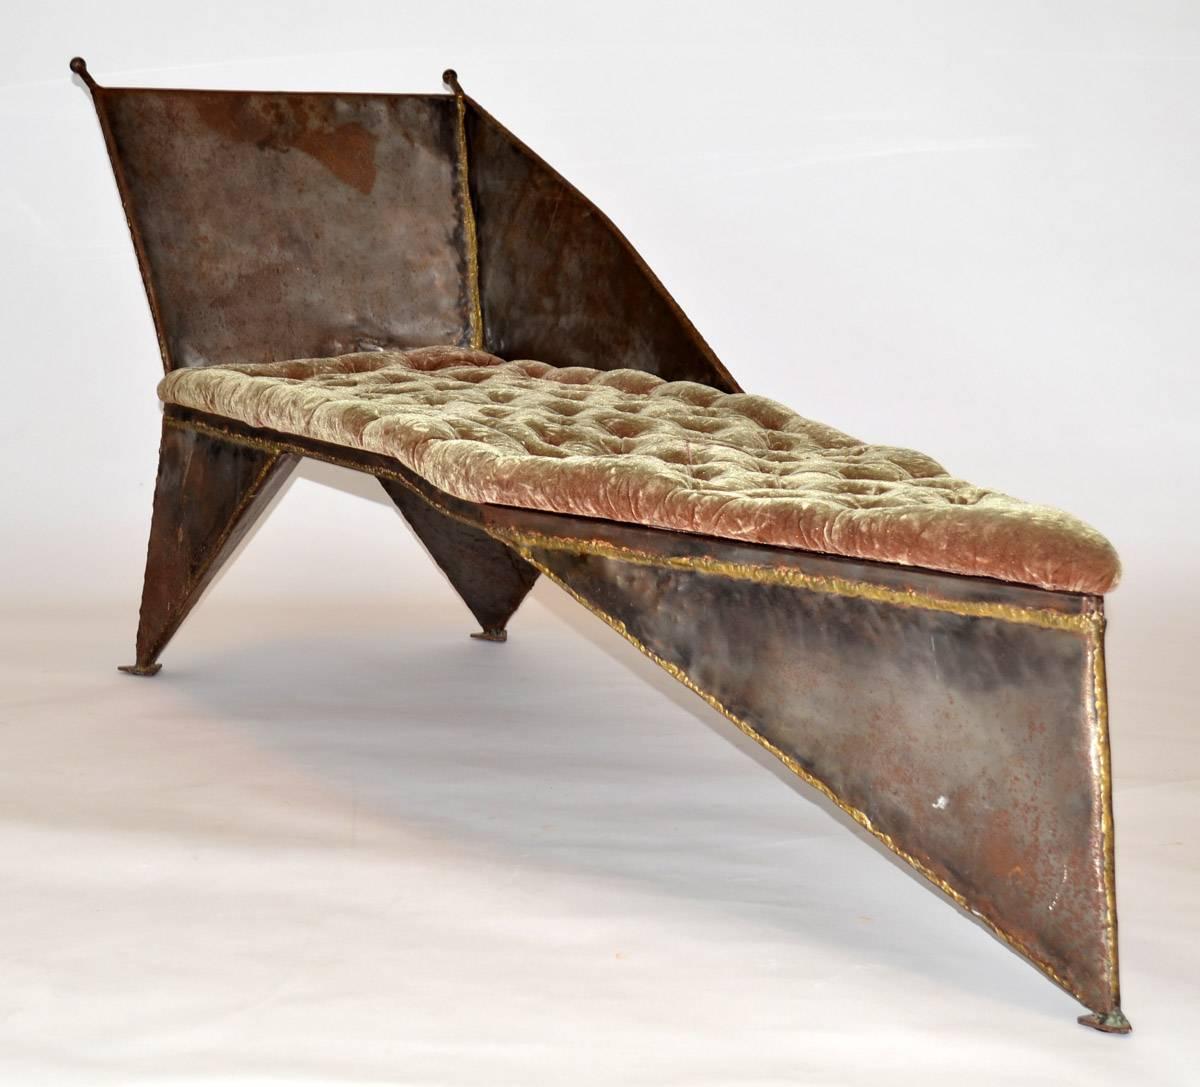 Studio chaise longue Brutal Design in Industrial welded metal over steel frame and tufted velvet upholstery with hidden storage under seat. Likely by Brazilian sculptor / metal worker Ignacio P., Miami, FL. Some rust and wear to seat.
American,